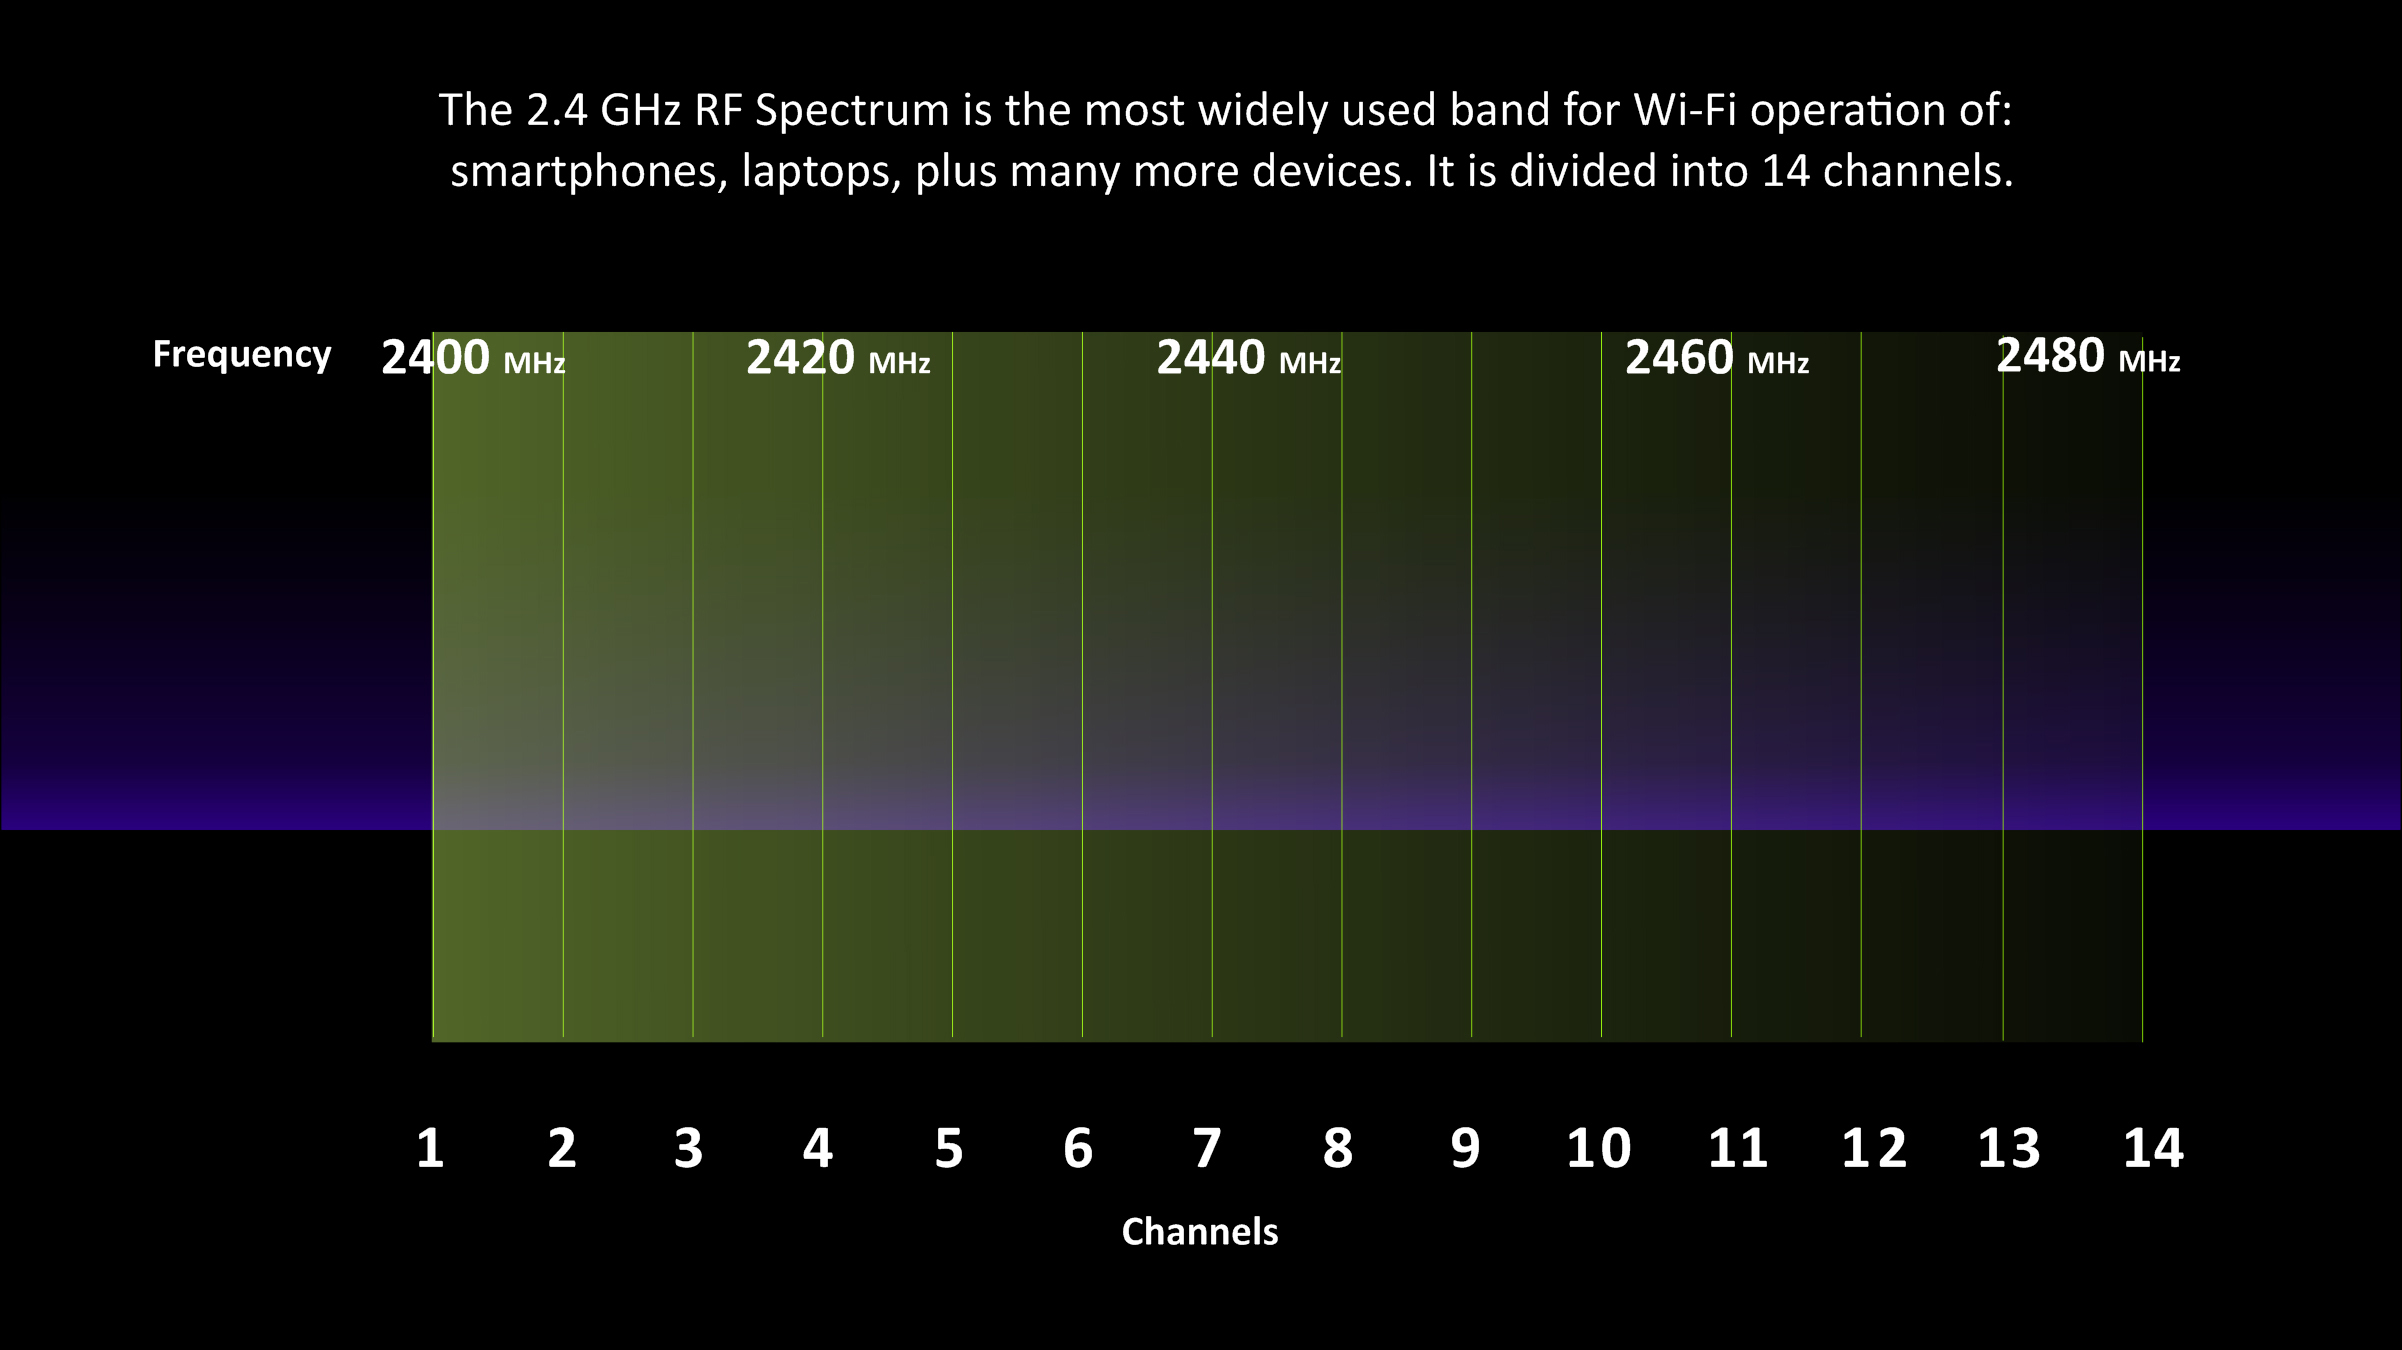 Multiverse 3 2.4GHz RF Spectrum is most widely used